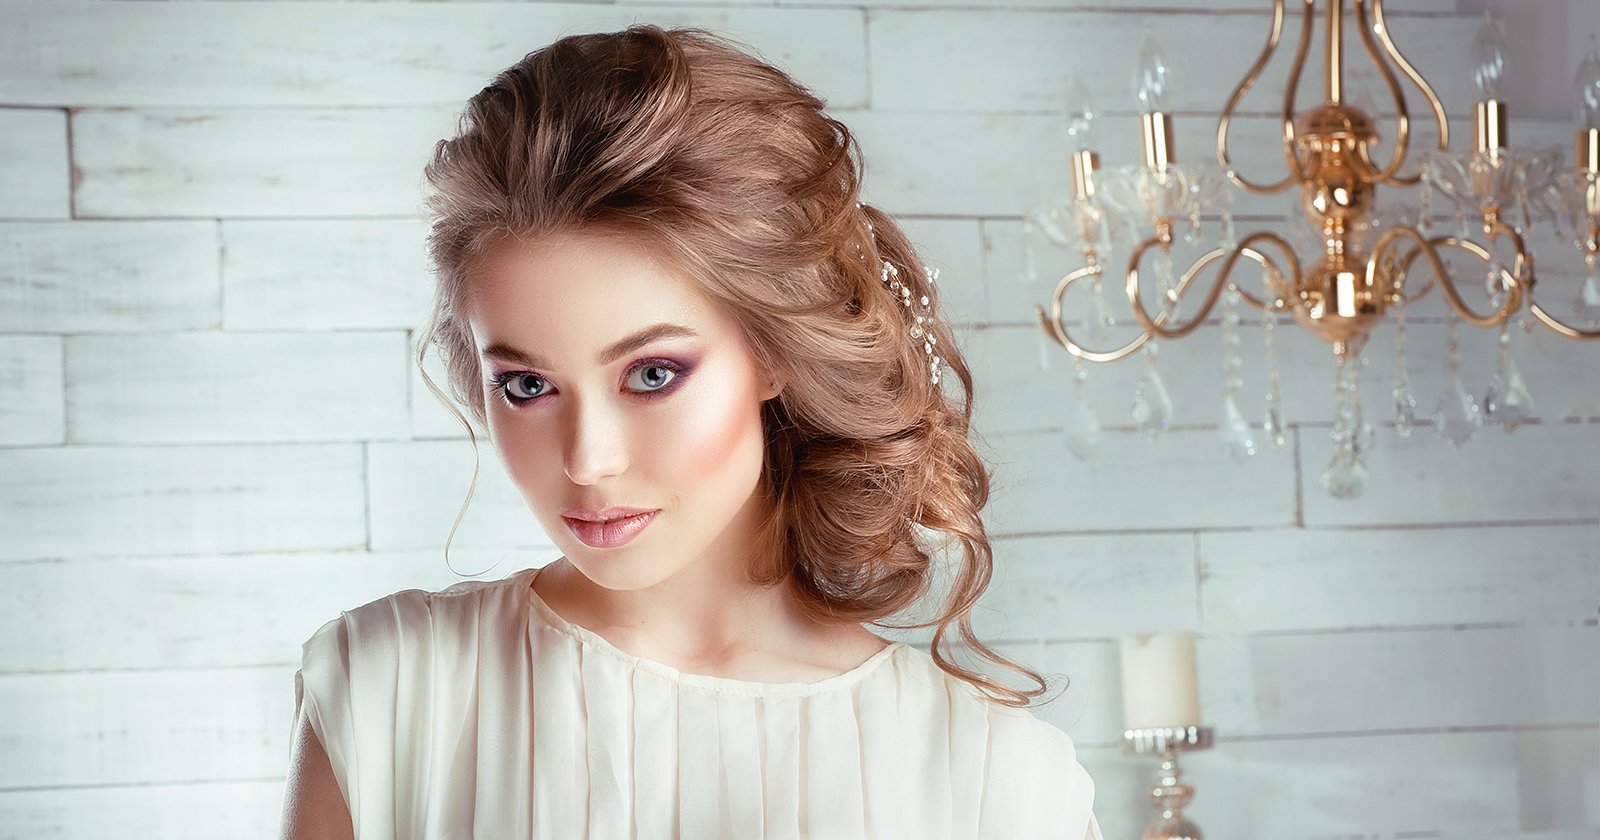 20 Long Prom Hairstyles & Trends – Best Prom Styles for Long Hair